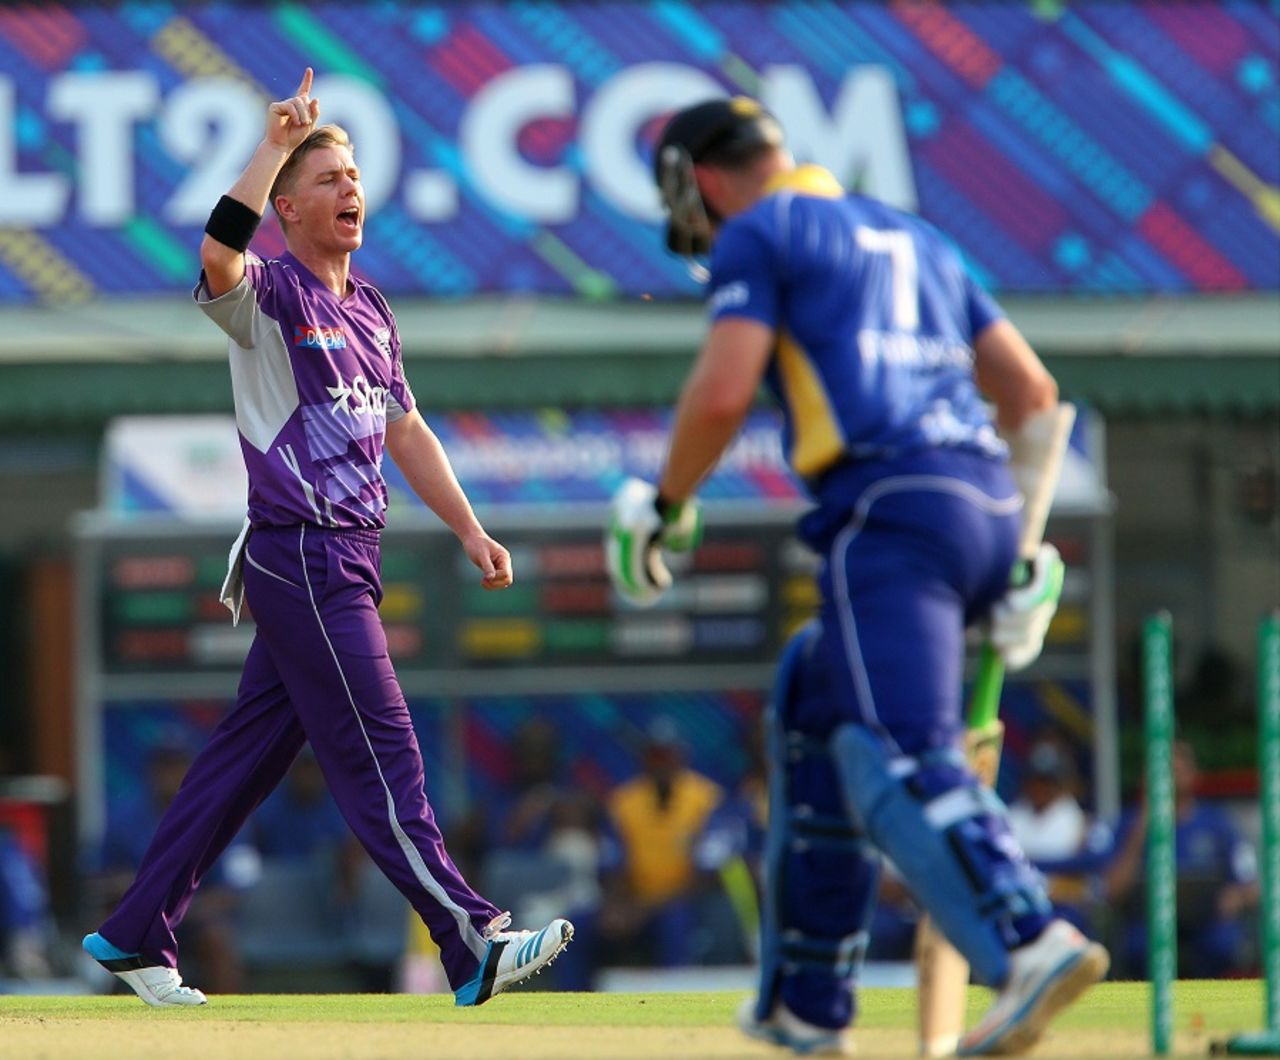 Xavier Doherty picked up four wickets, Barbados Tridents v Hobart Hurricanes, Champions League T20, Mohali, September 28, 2014